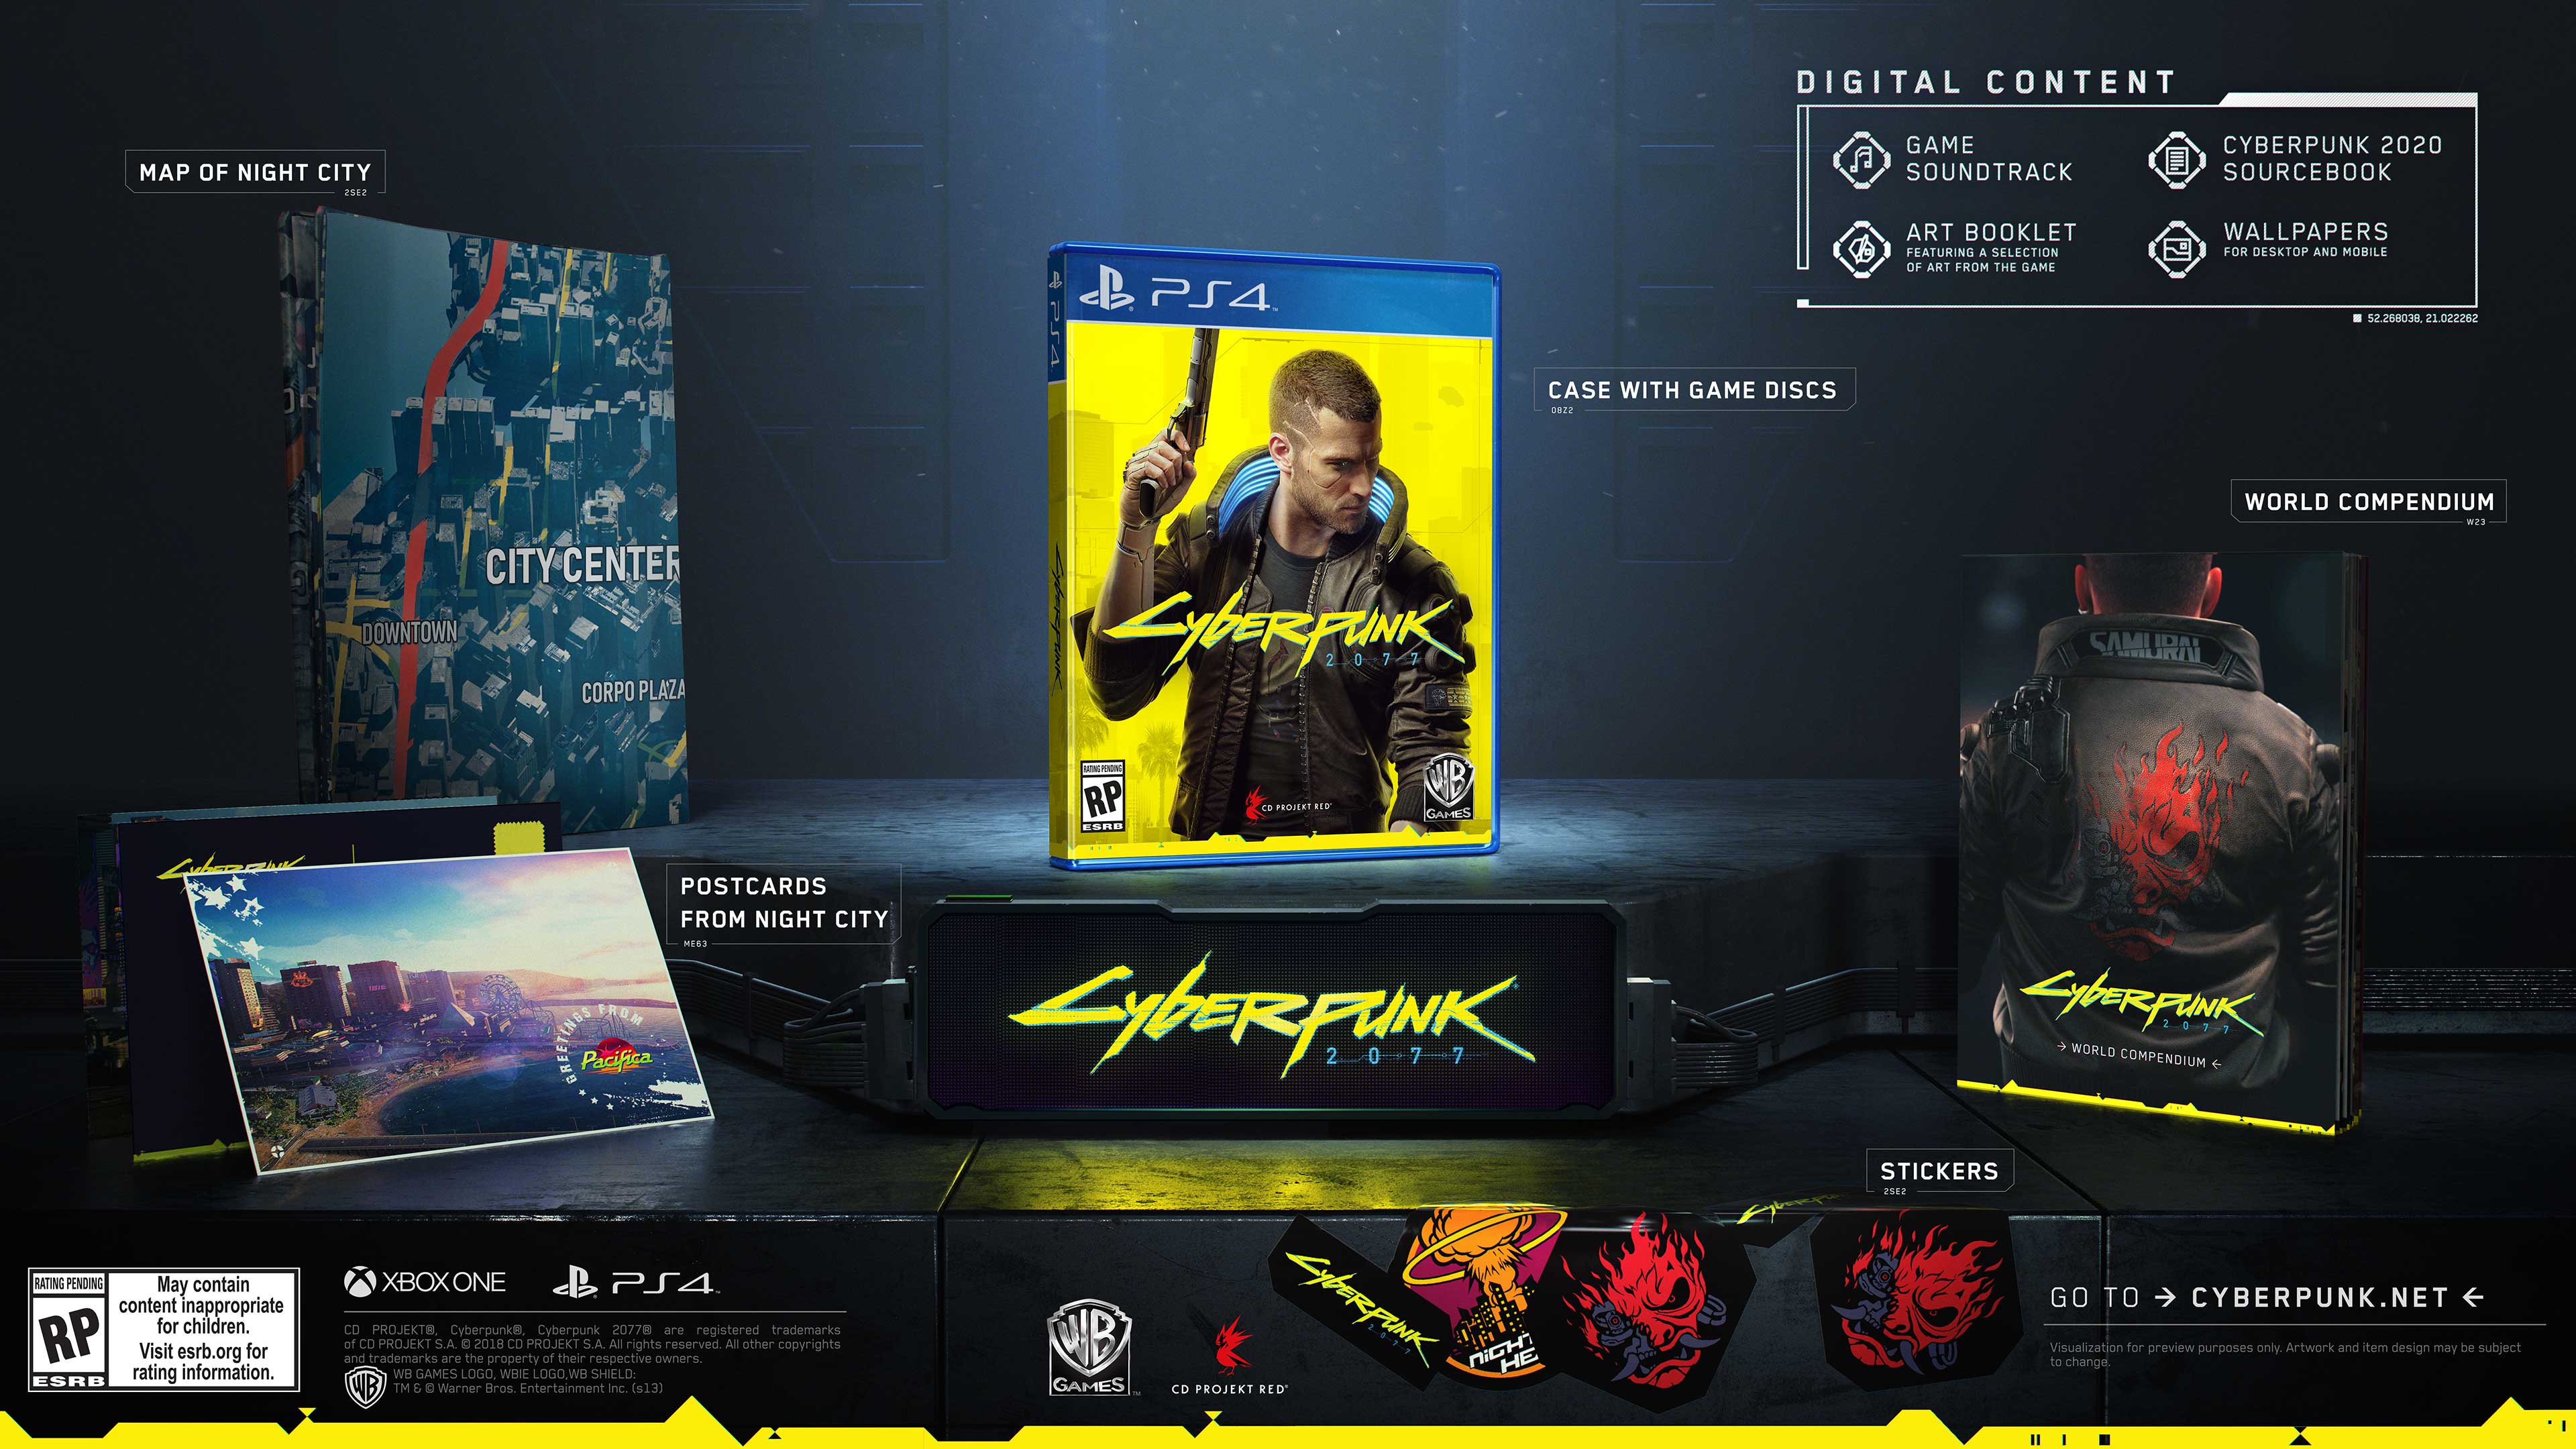 CyberPunk 2077 for PlayStation 4 Collector's Edition - image 1 of 2